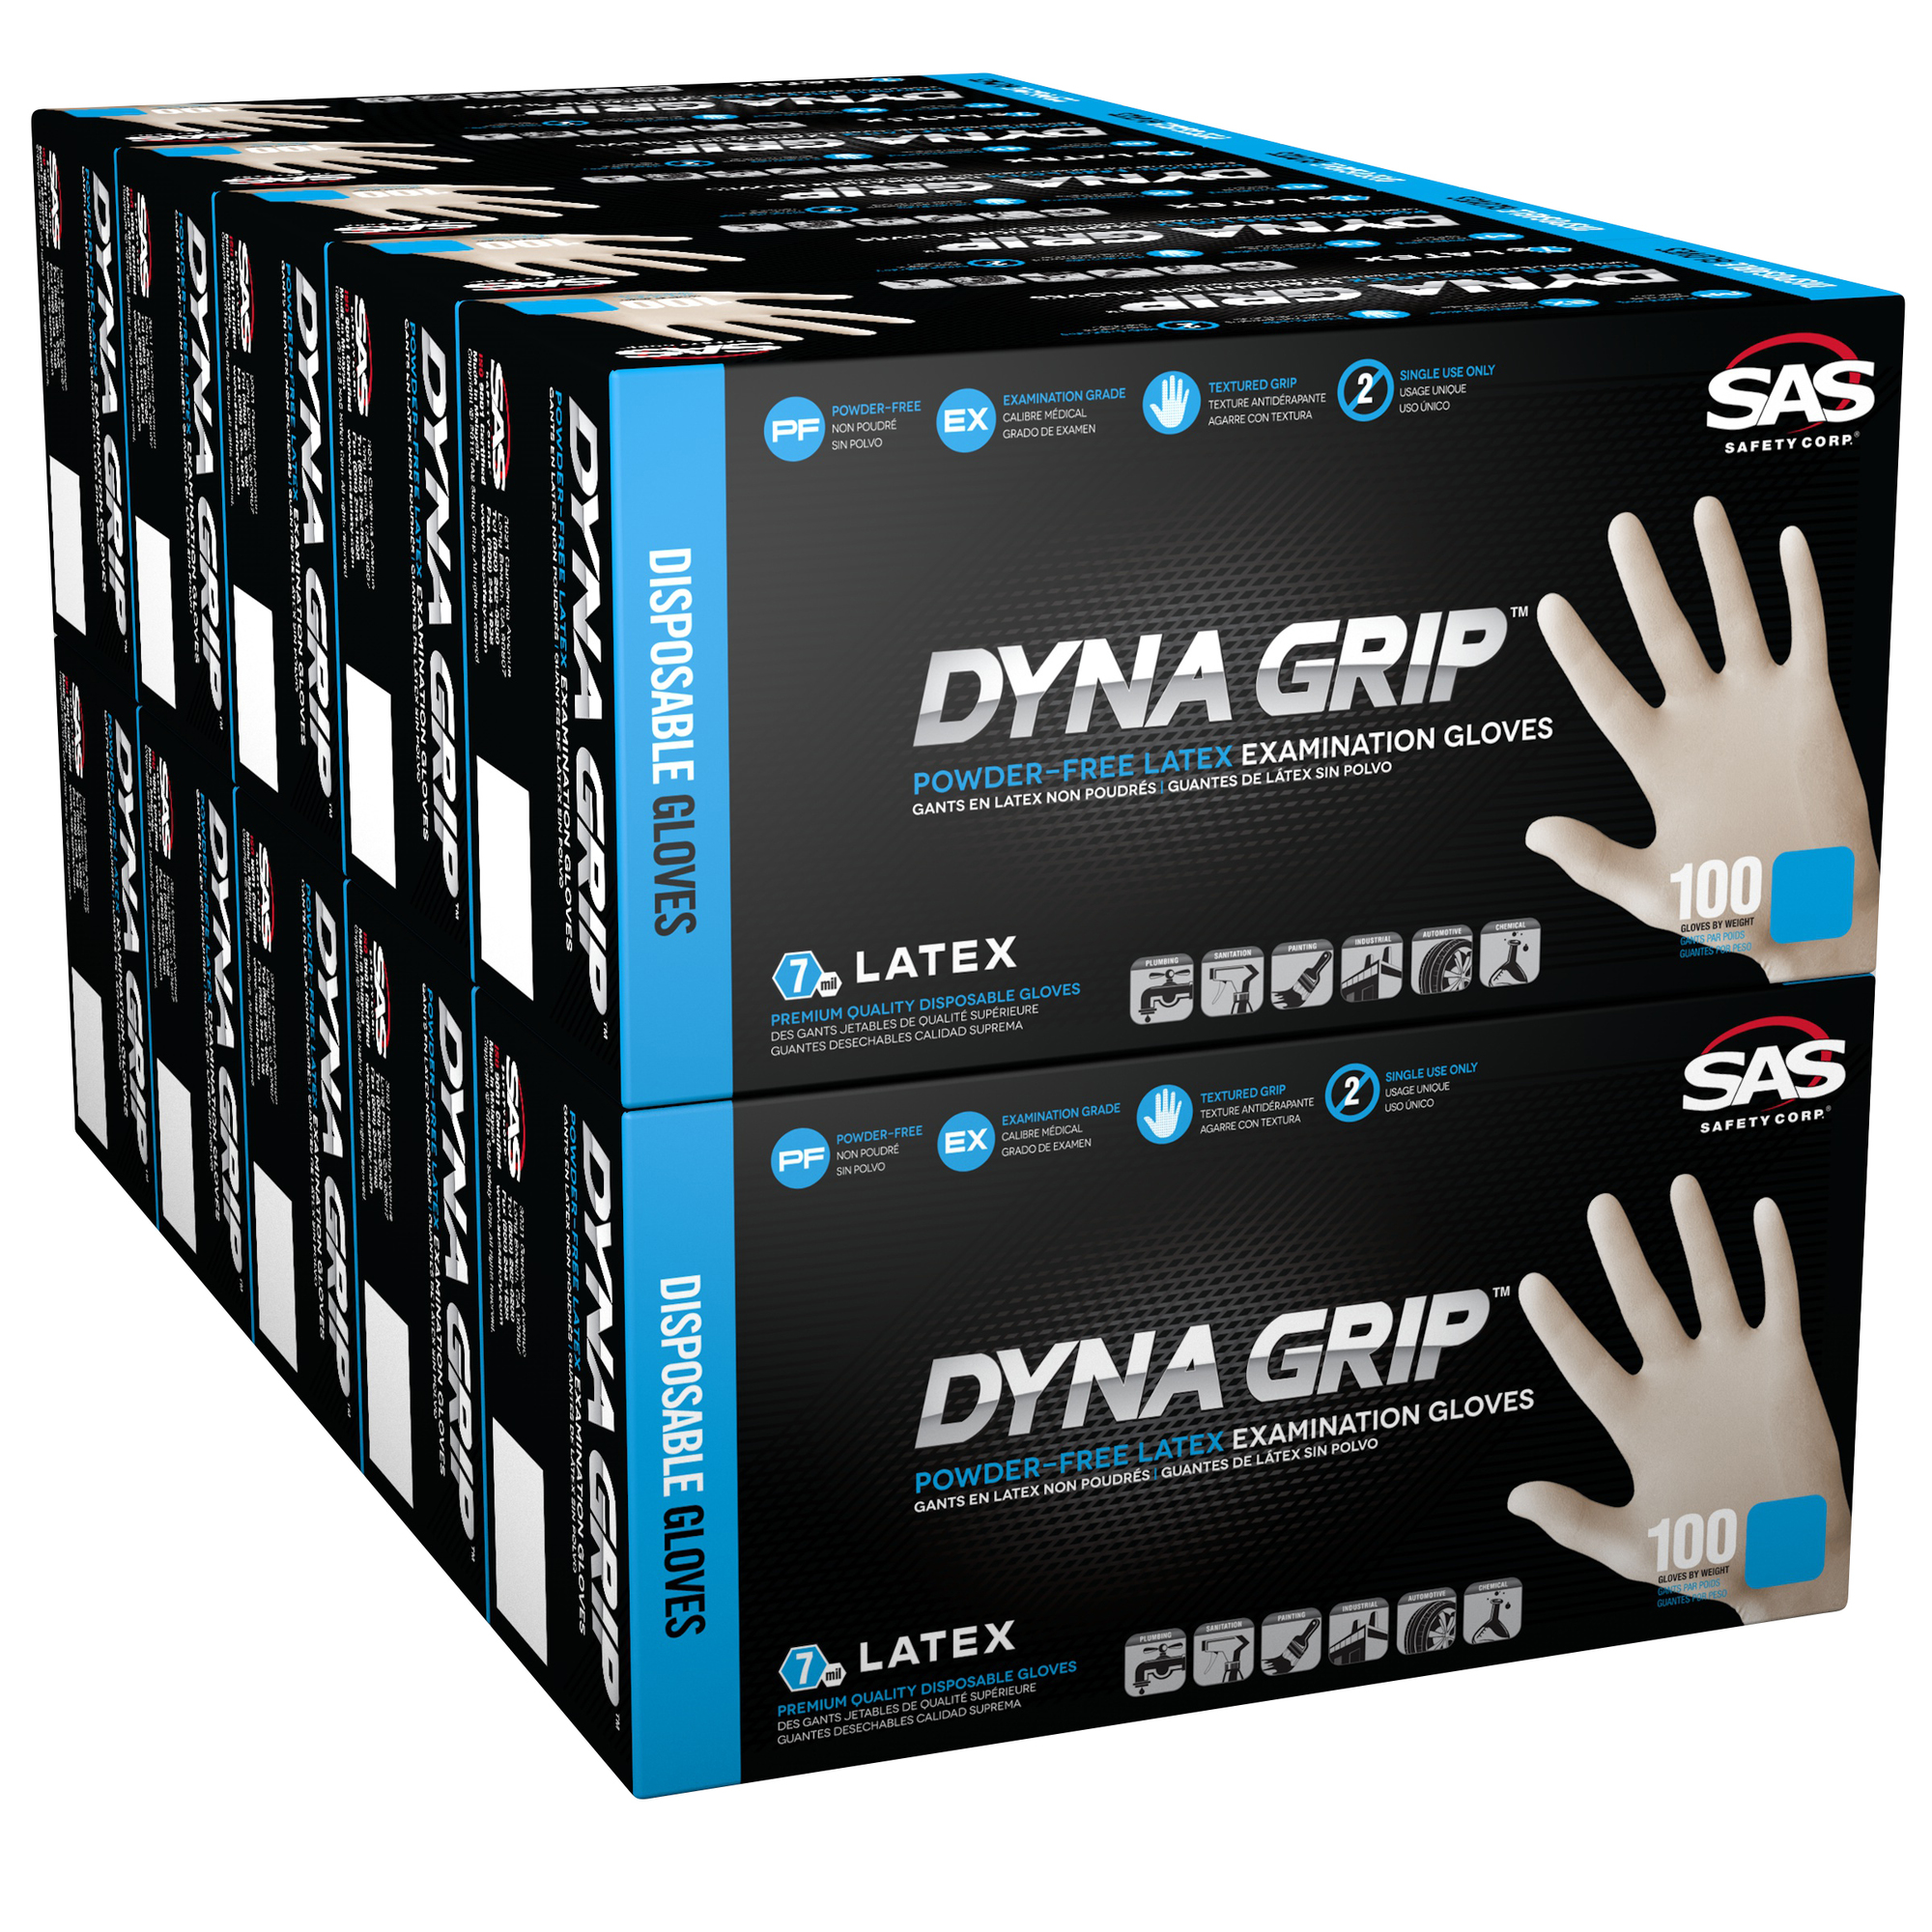 Dyna-Grip, Case of Dyna Grip PF Exam Latex 7 mil 1000 Glove, Size M, Color White, Included (qty.) 1000 Model 650-1002CASE